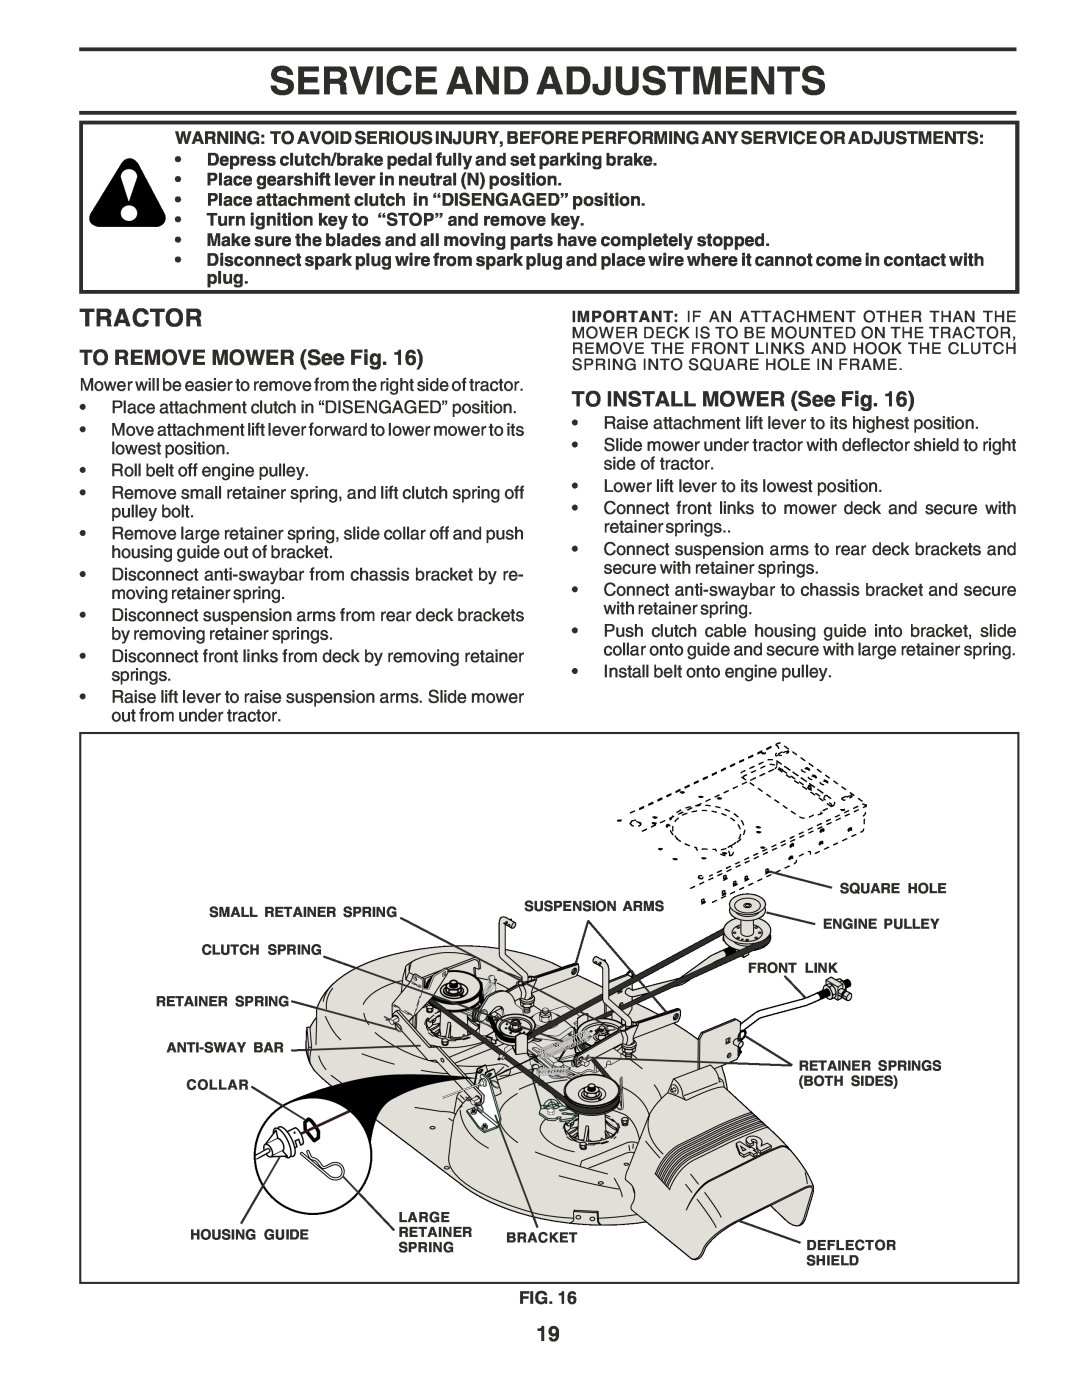 Poulan PR1842STD owner manual Service And Adjustments, TO REMOVE MOWER See Fig, TO INSTALL MOWER See Fig, Tractor 